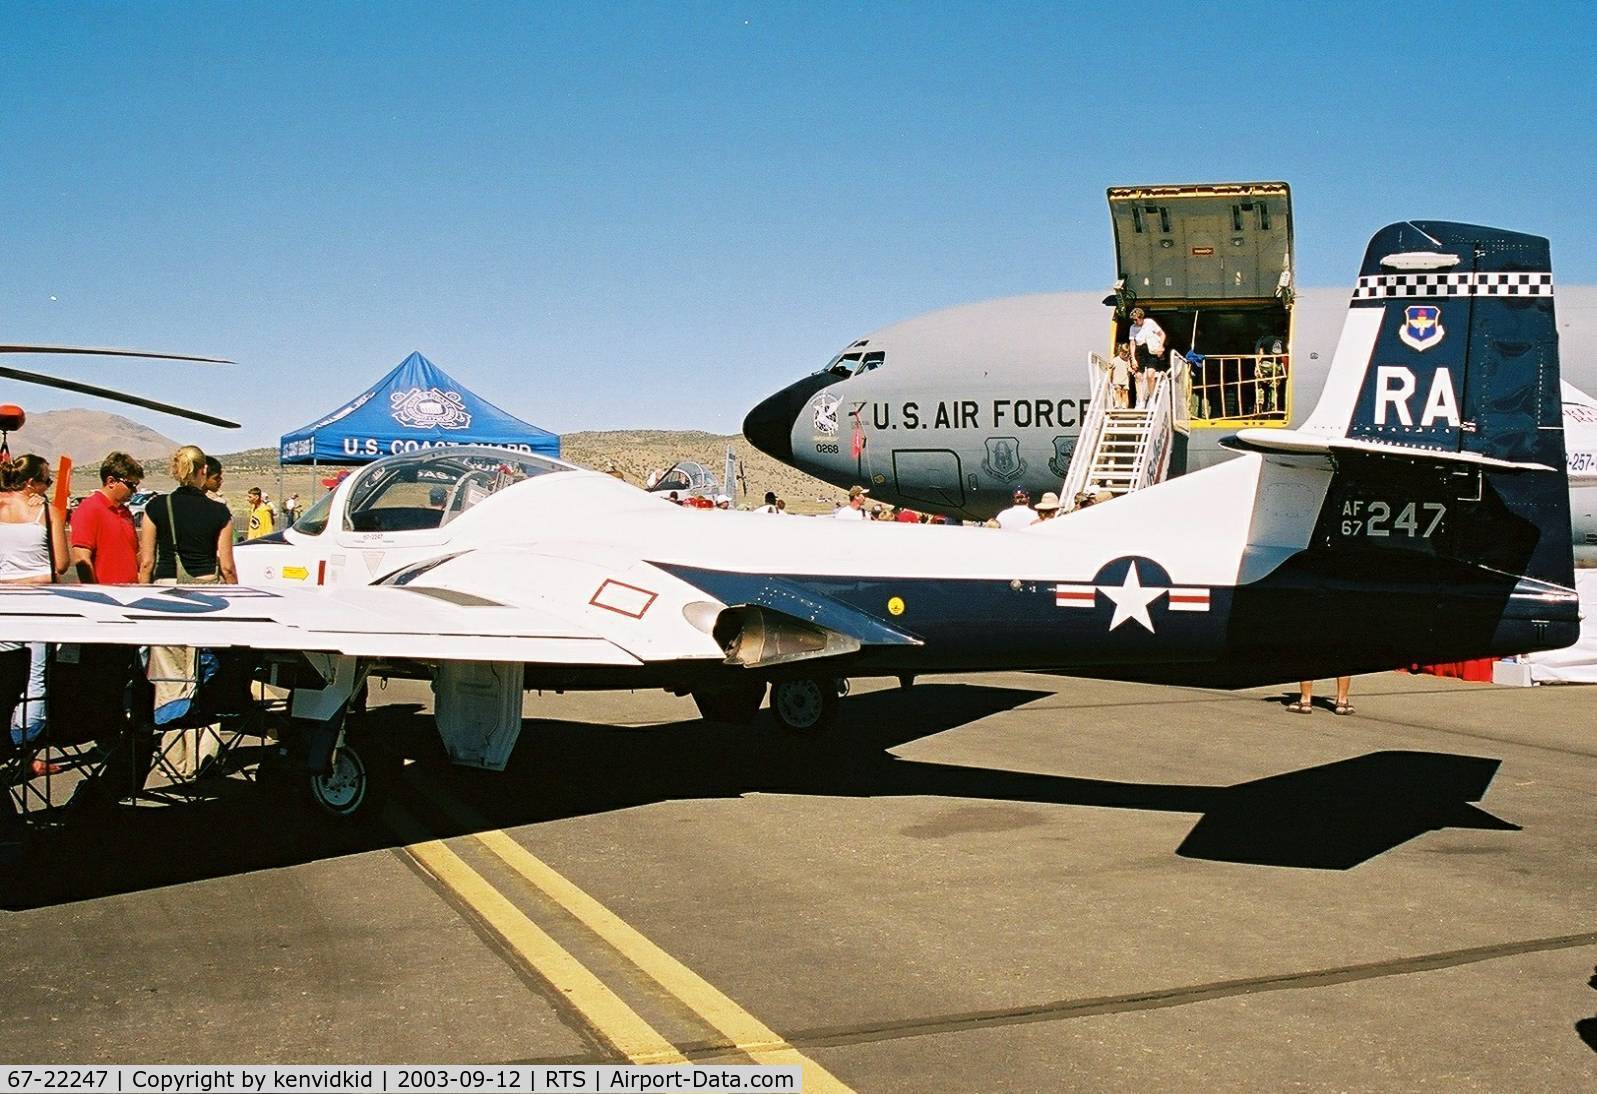 67-22247, 1956 Cessna T-37B Tweety Bird C/N 41053, At the 2003 Reno Air Races.
To AMARC as AATE3018 2006.